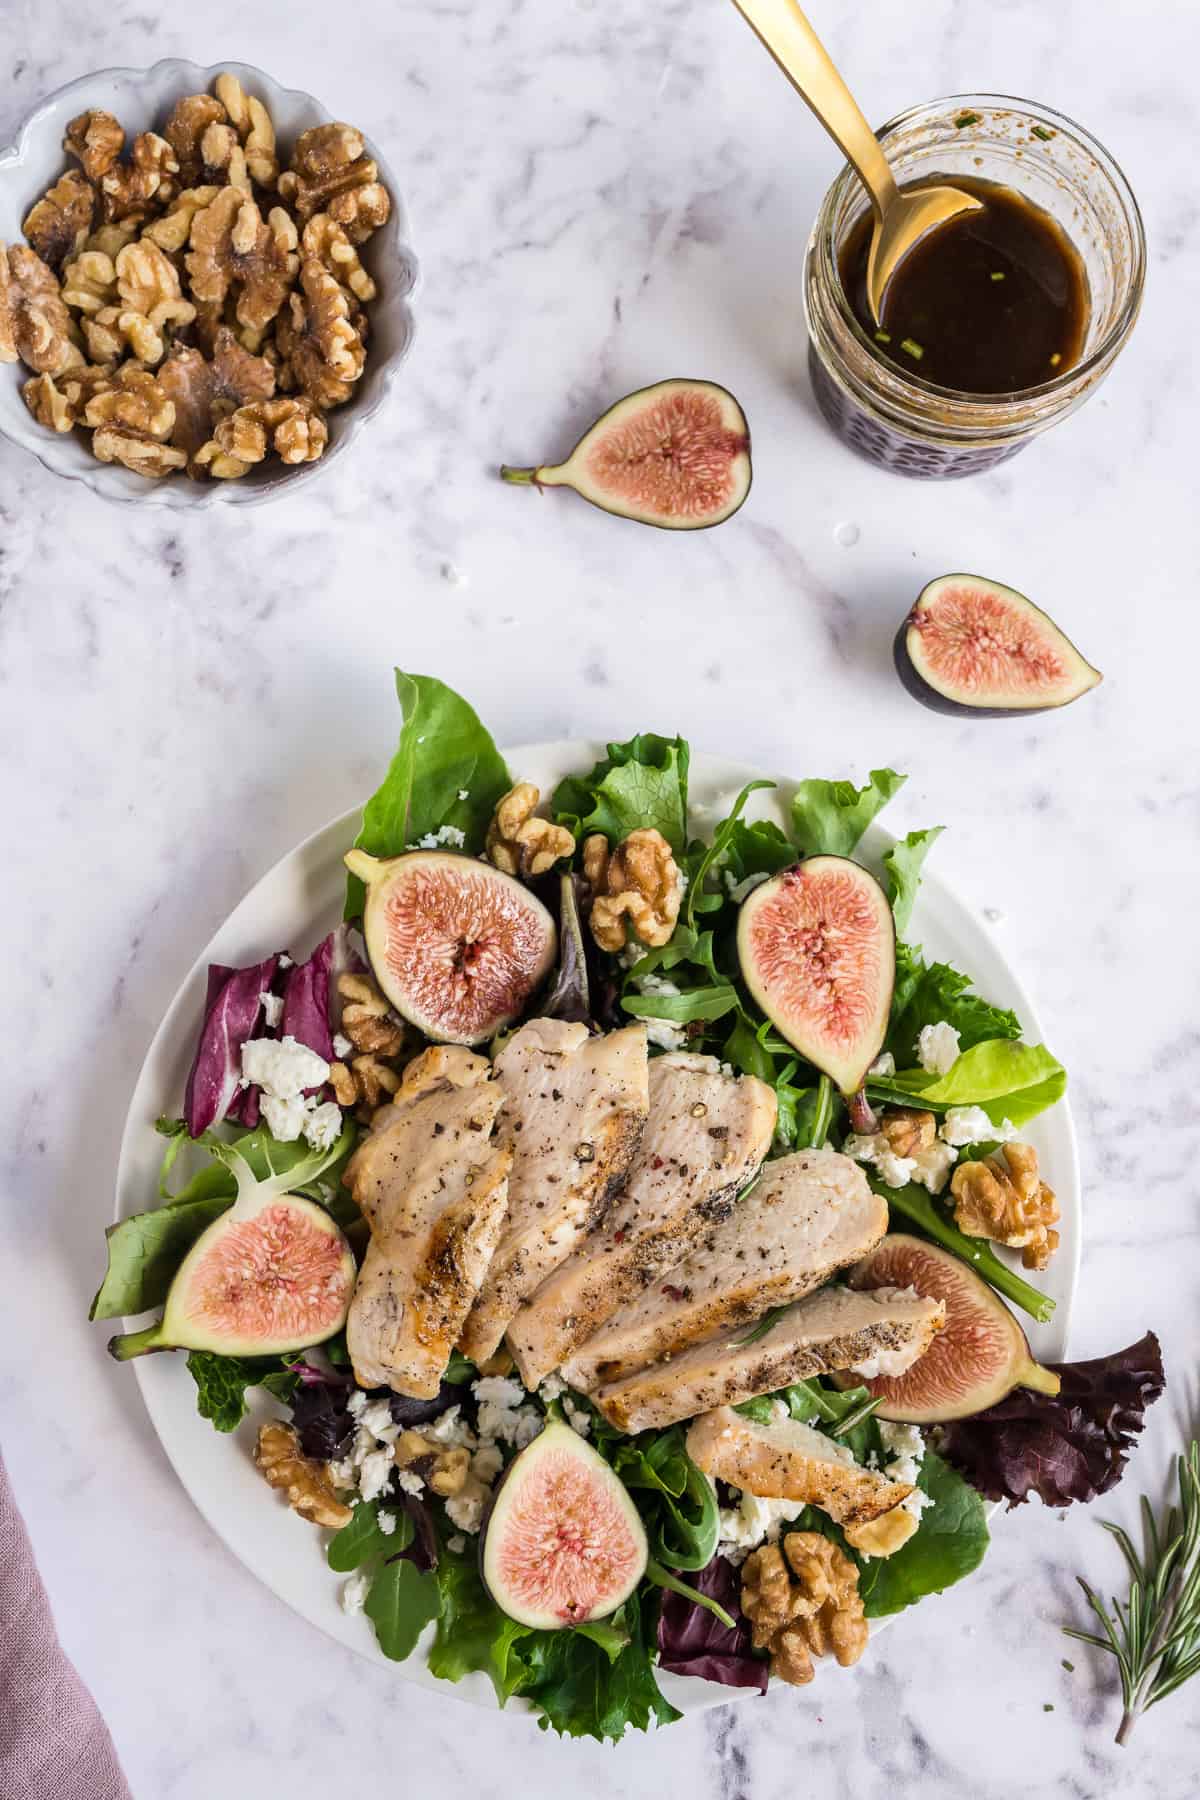 A salad with figs, walnuts and feta cheese topped with chicken on a white plate with extra ingredients around it.